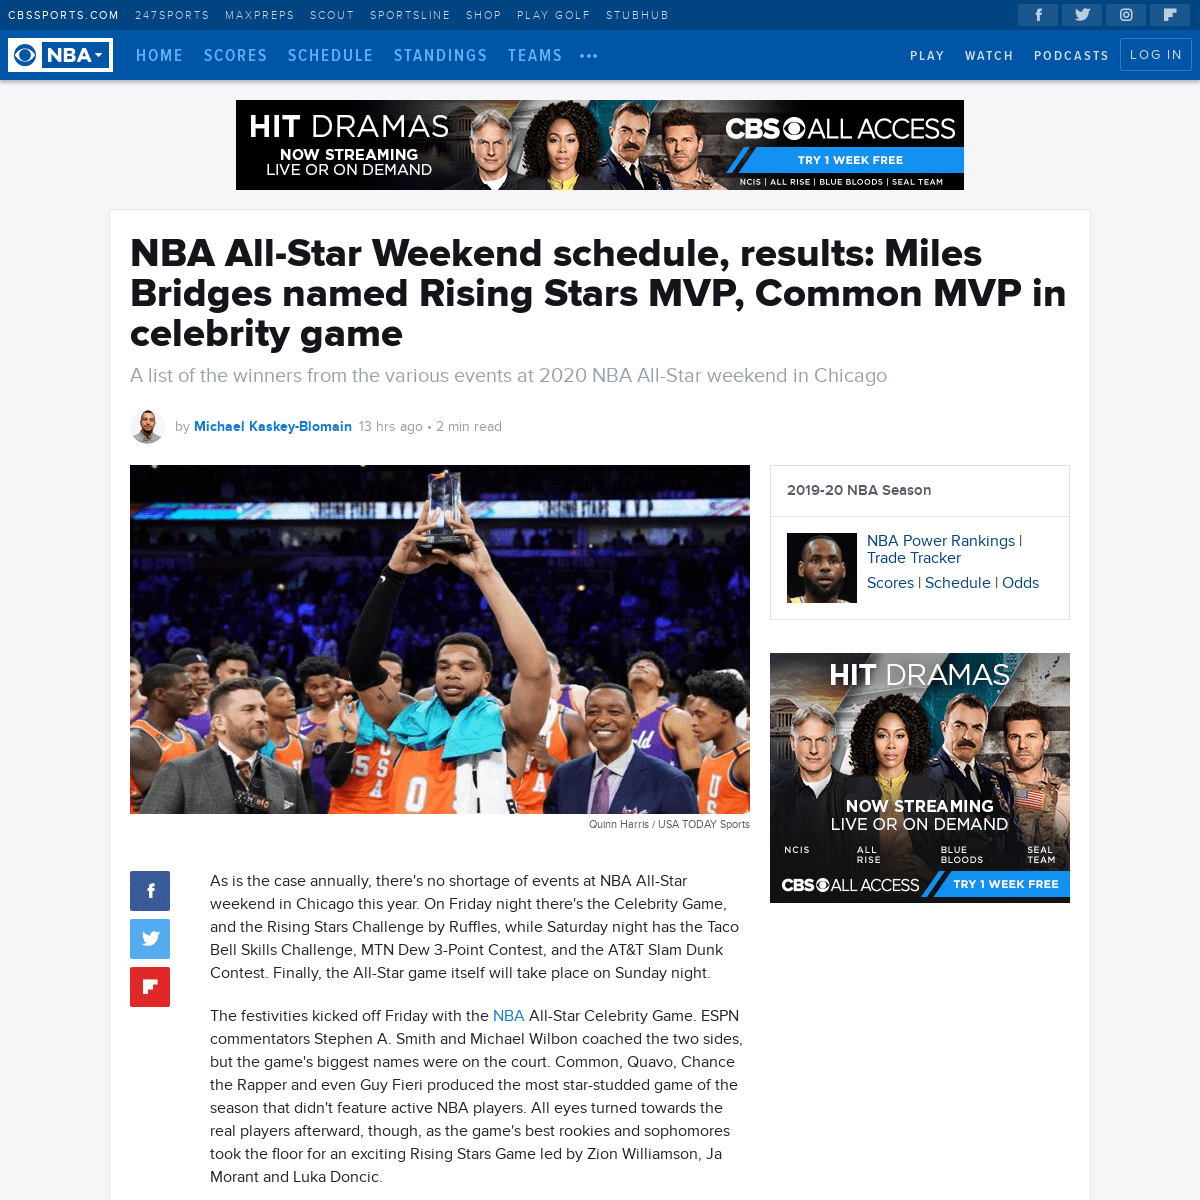 A complete backup of www.cbssports.com/nba/news/nba-all-star-weekend-schedule-results-miles-bridges-named-rising-stars-mvp-commo